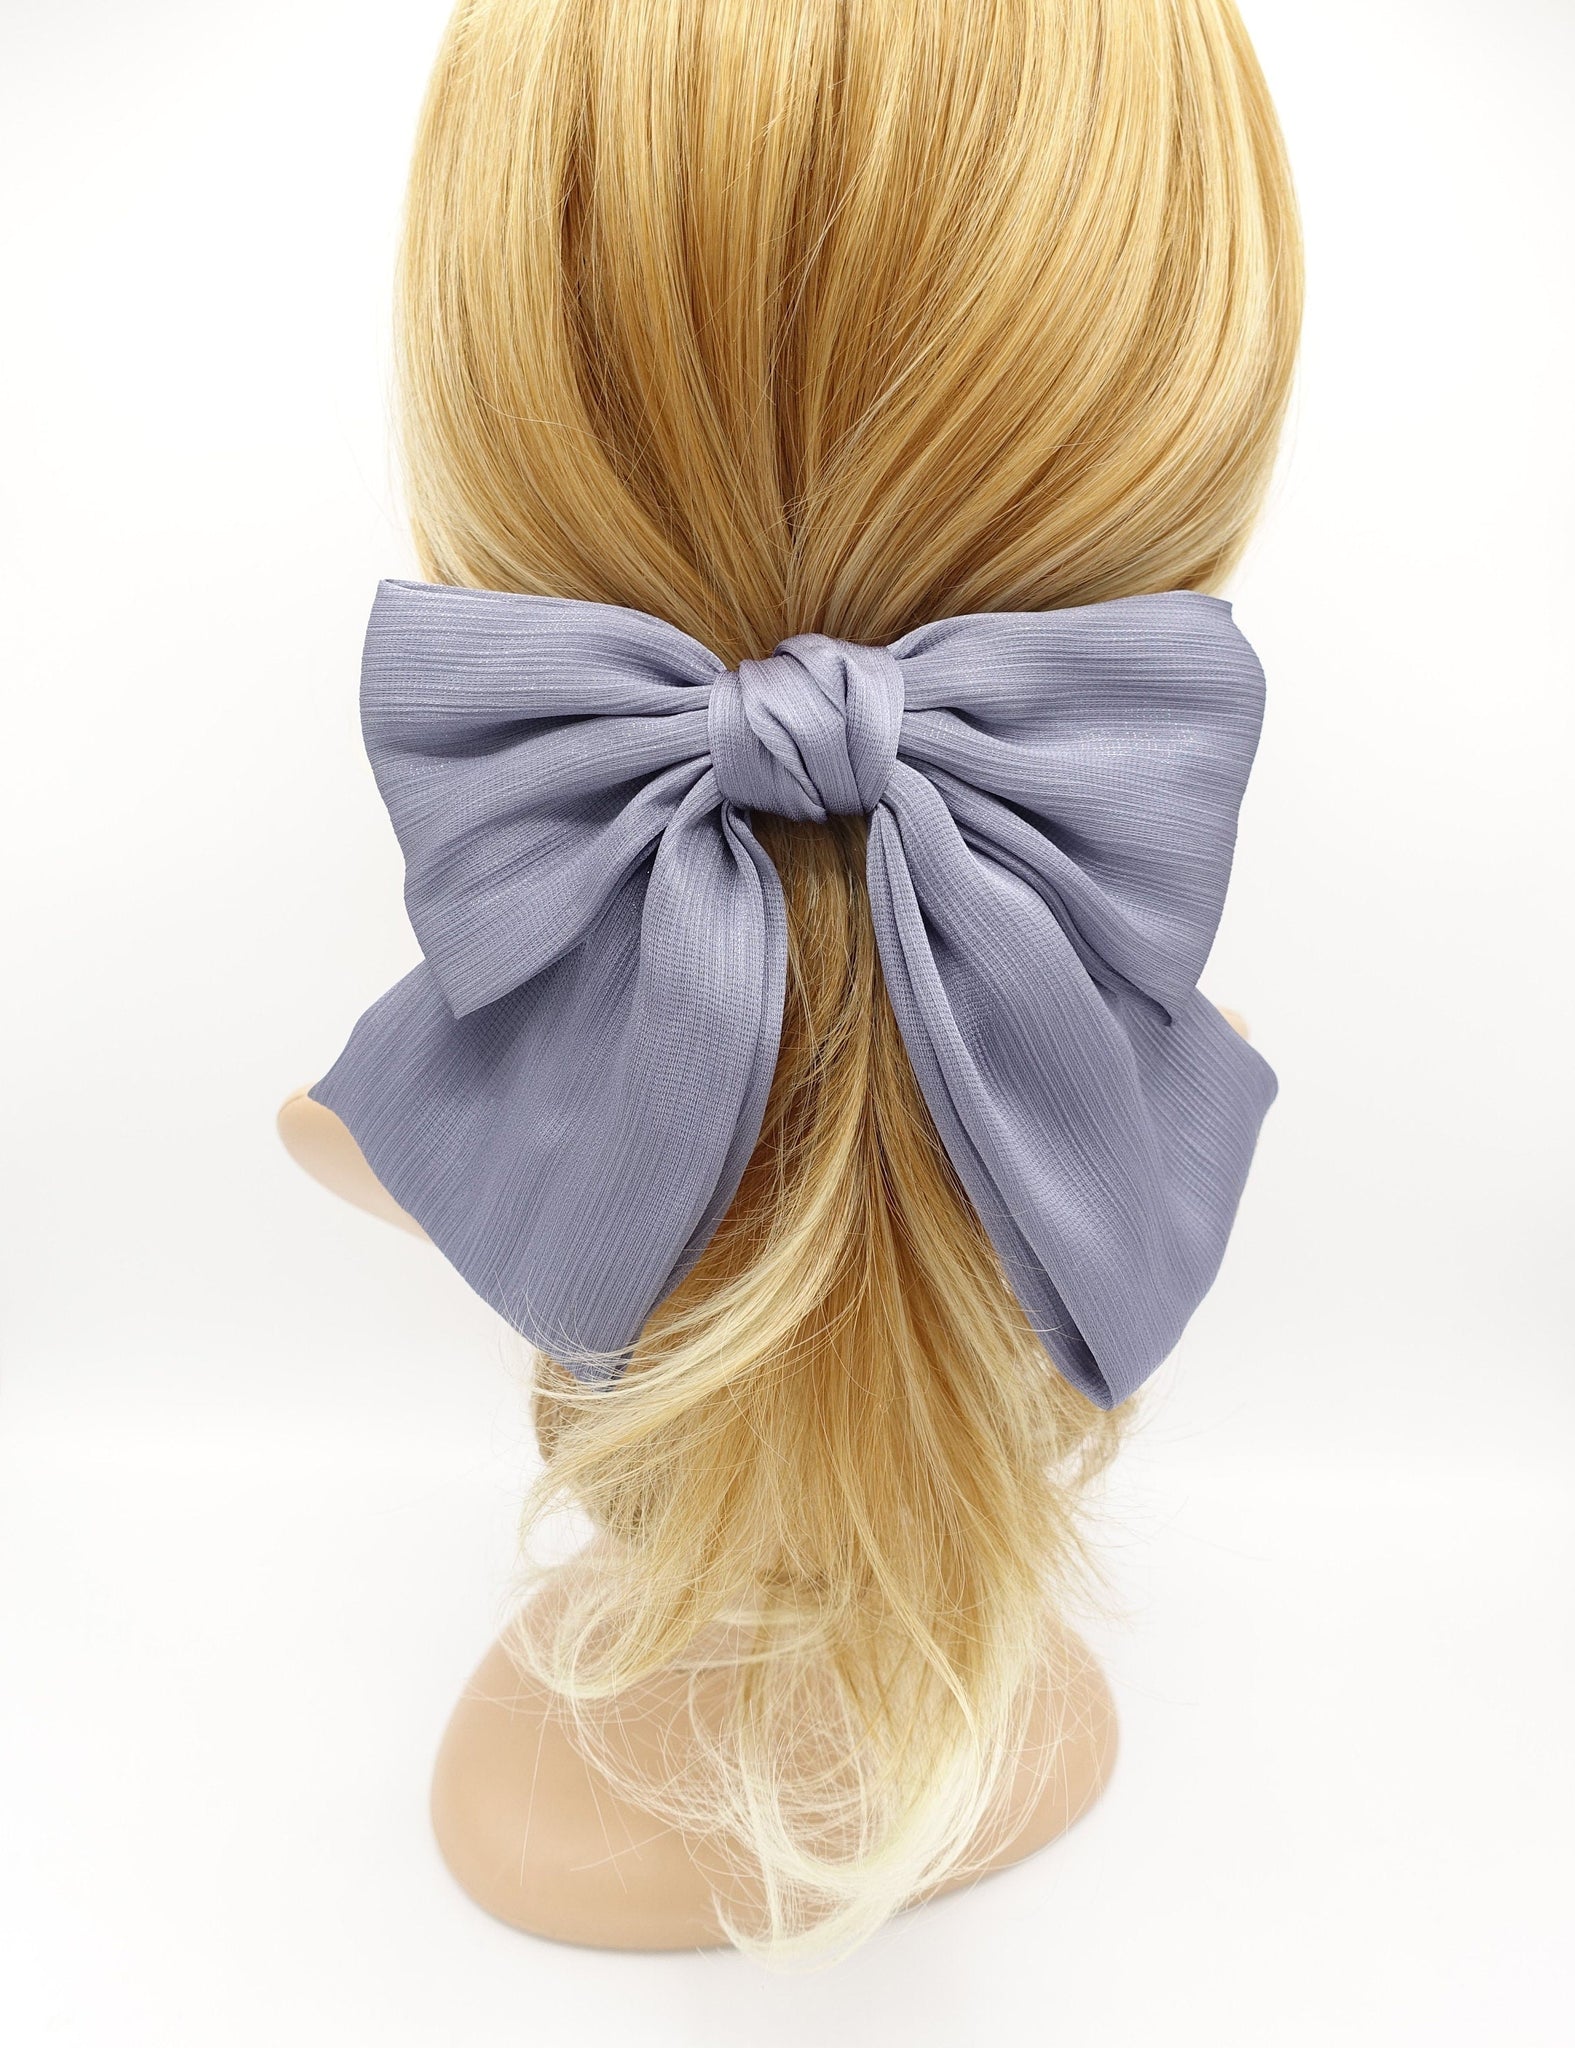 veryshine.com Barrette (Bow) pearl glossy crinkled satin bow french hair barrette women hair accessory